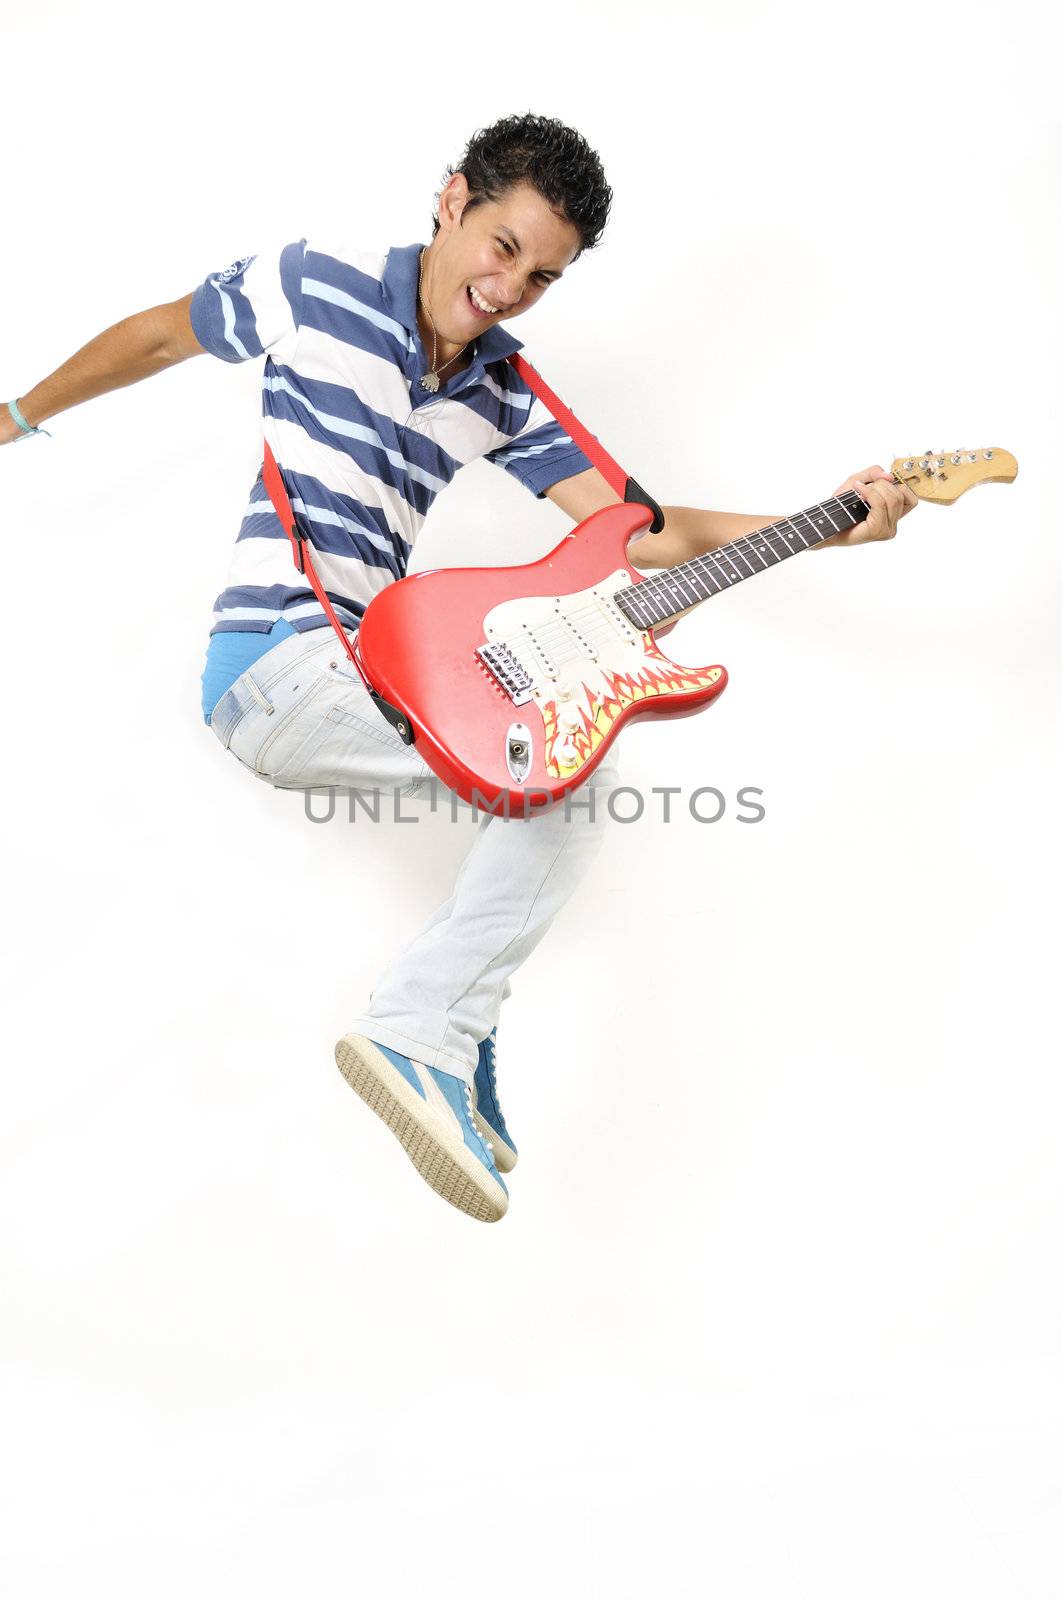 Jumping with electric guitar by rgbspace